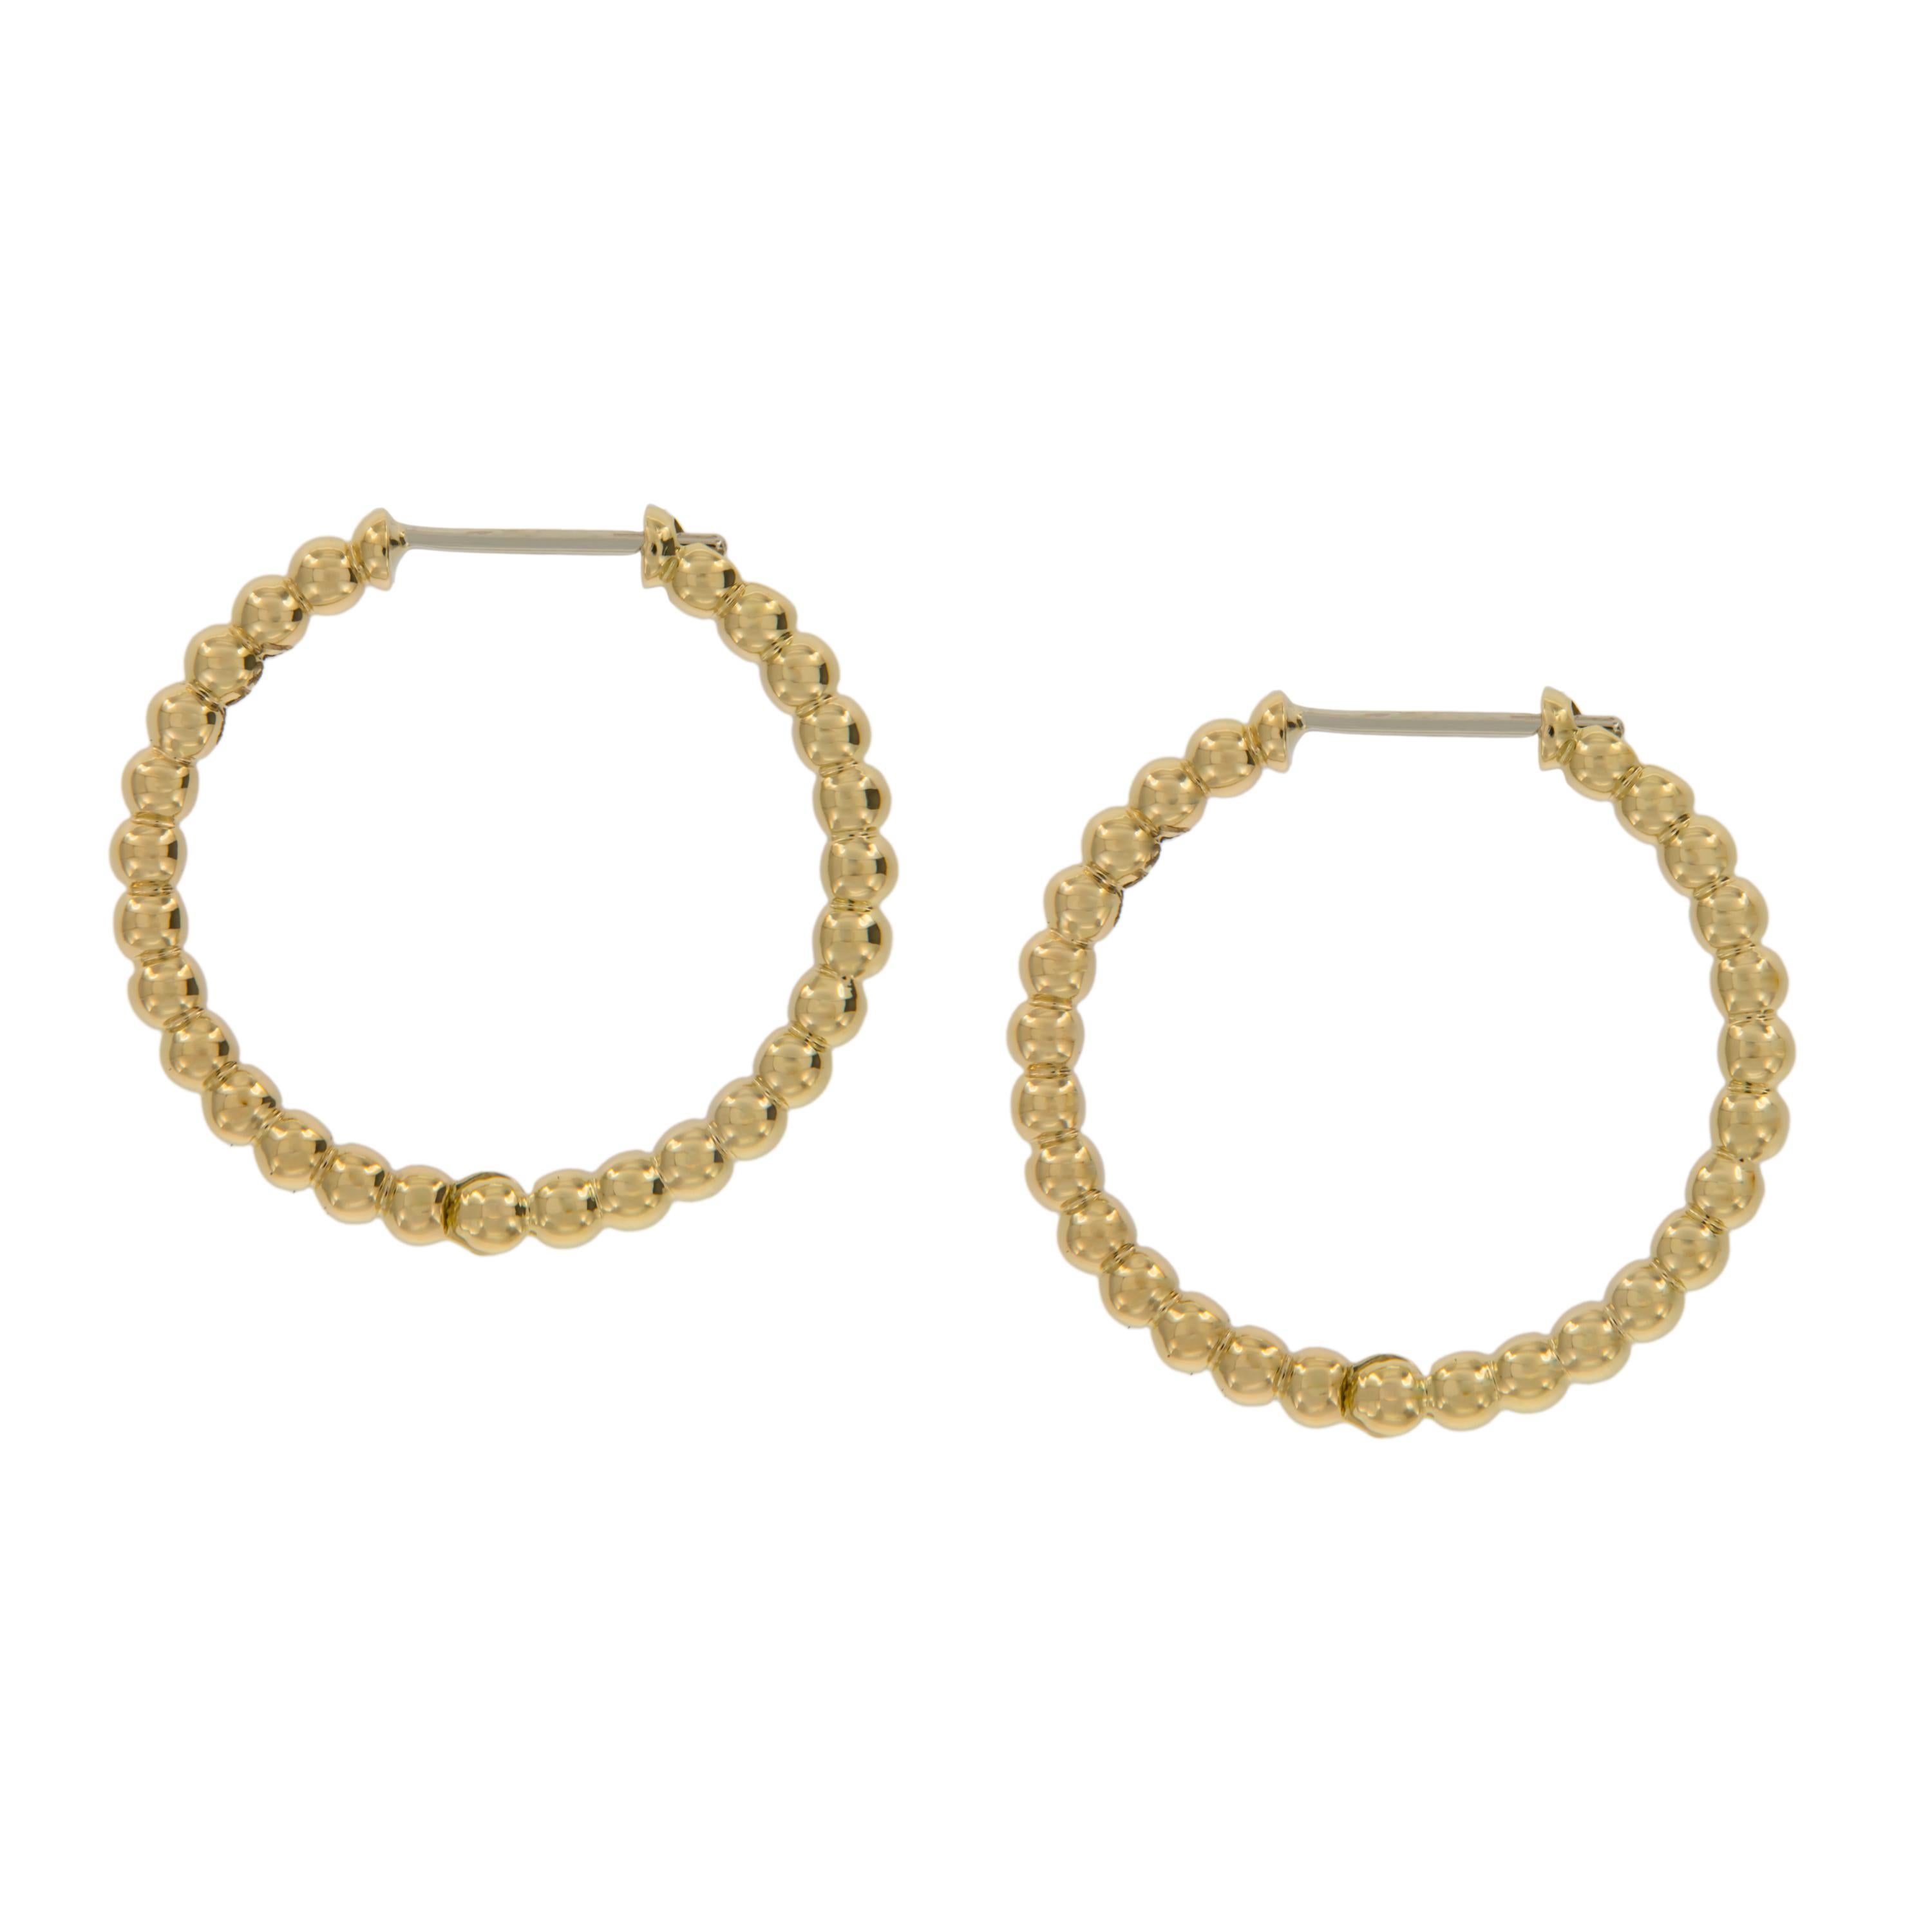 There is nothing more classic than these hoop earrings beautifully accented with gold ball 